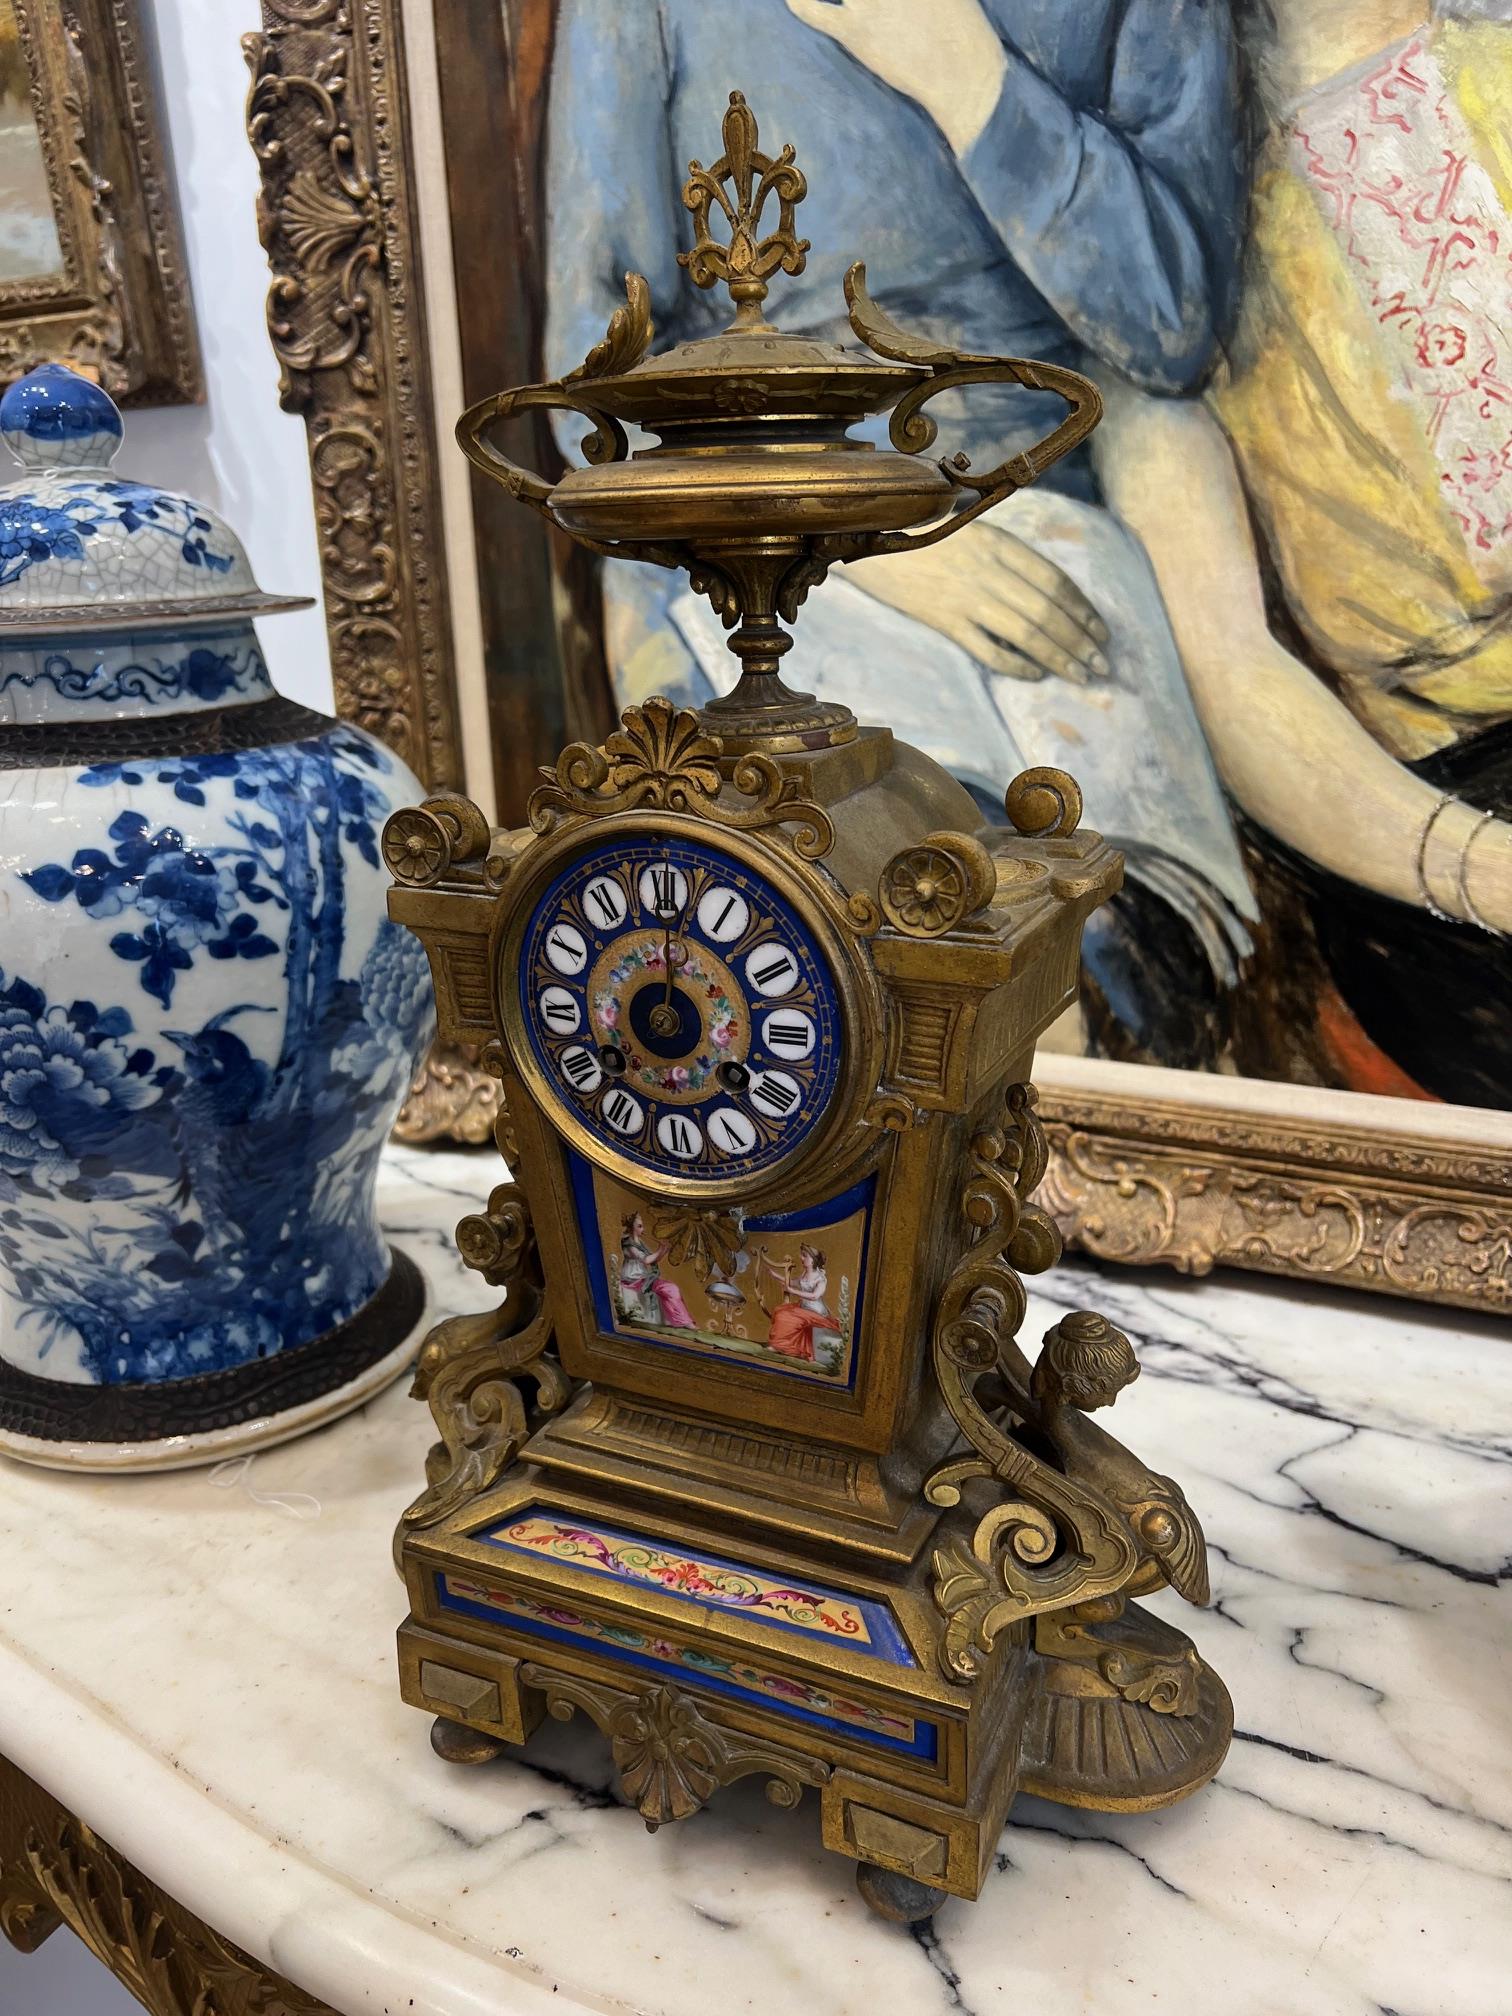 A LATE 19TH CENTURY FRENCH PORCELAIN MOUTED ORMOLU MANTEL CLOCK - Image 6 of 6